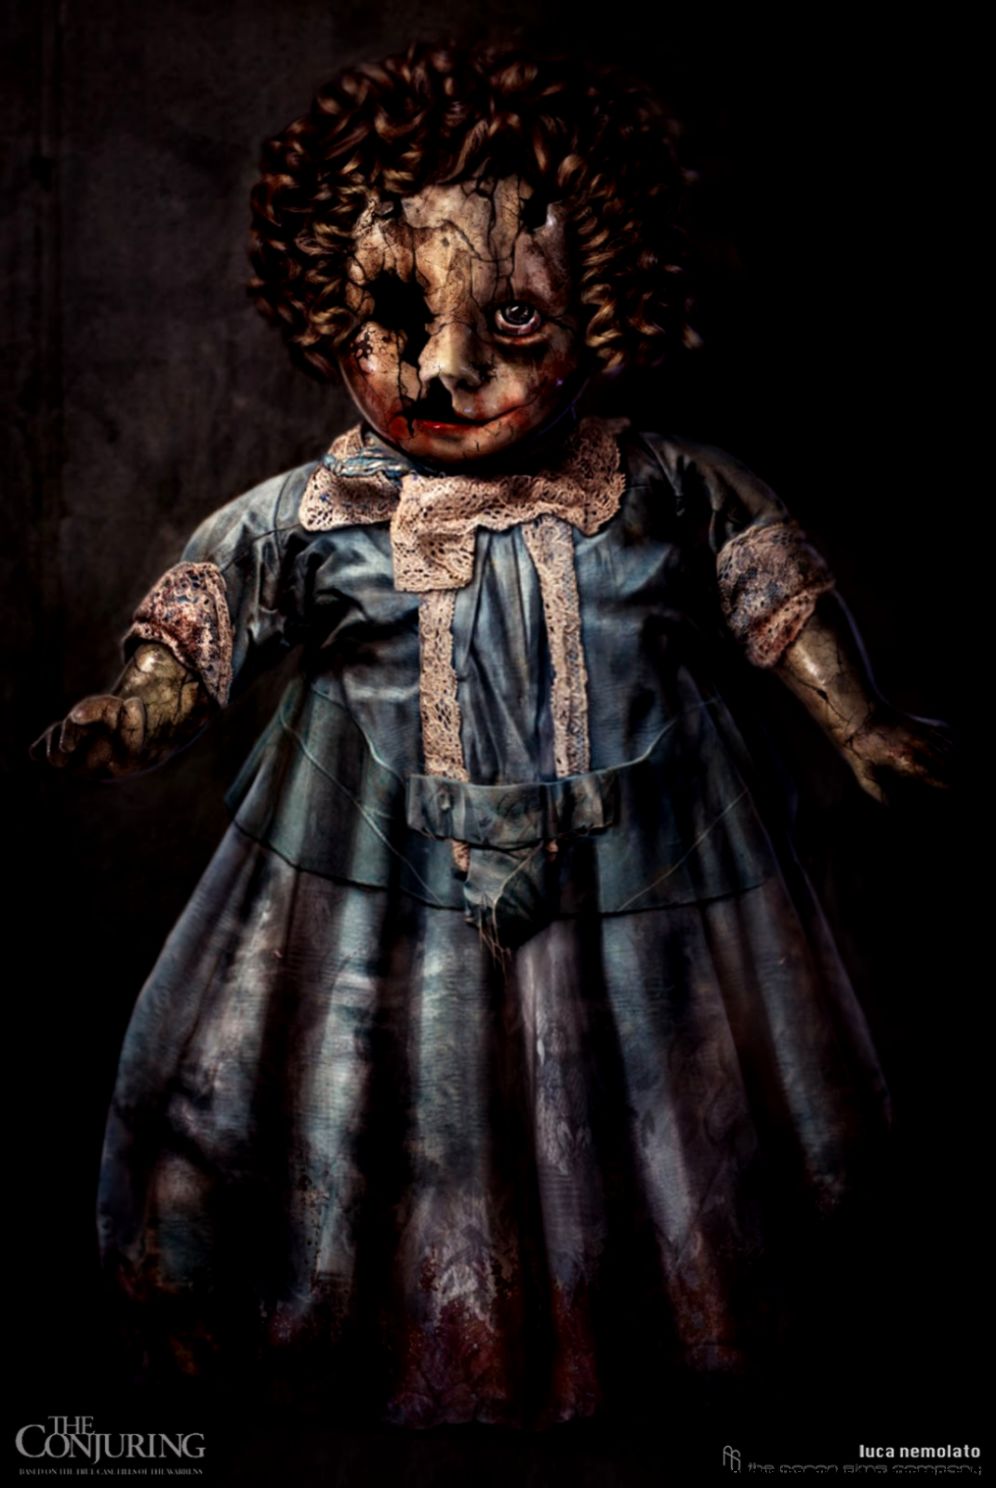 Conjuring Annabelle Doll Free High Definition Wallpapers